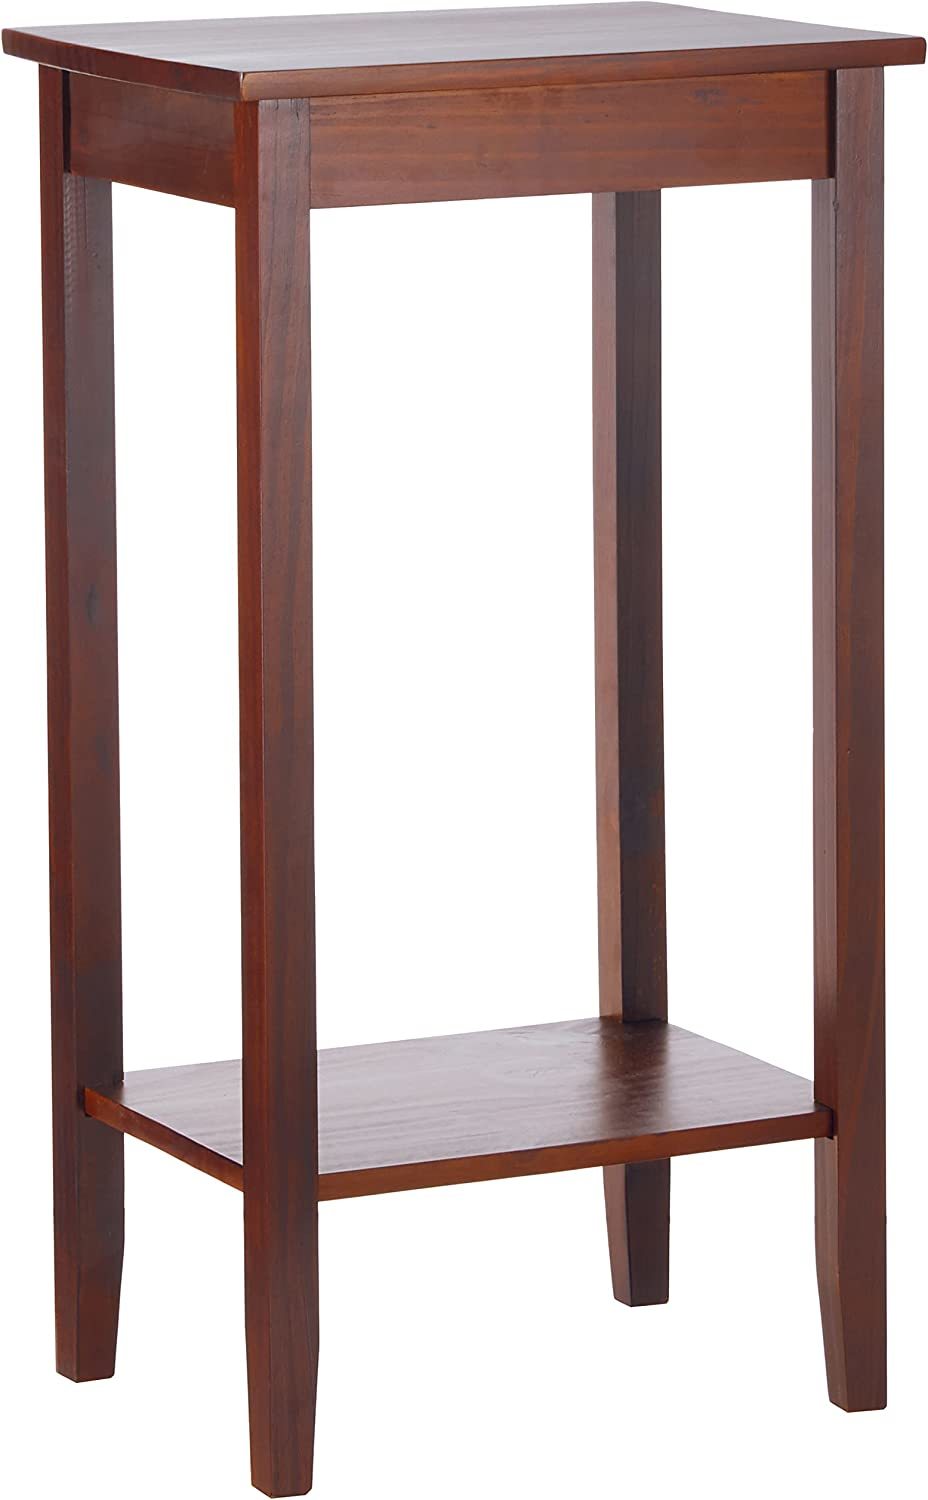 Dhp Tall Rosewood End Table. - $91.92